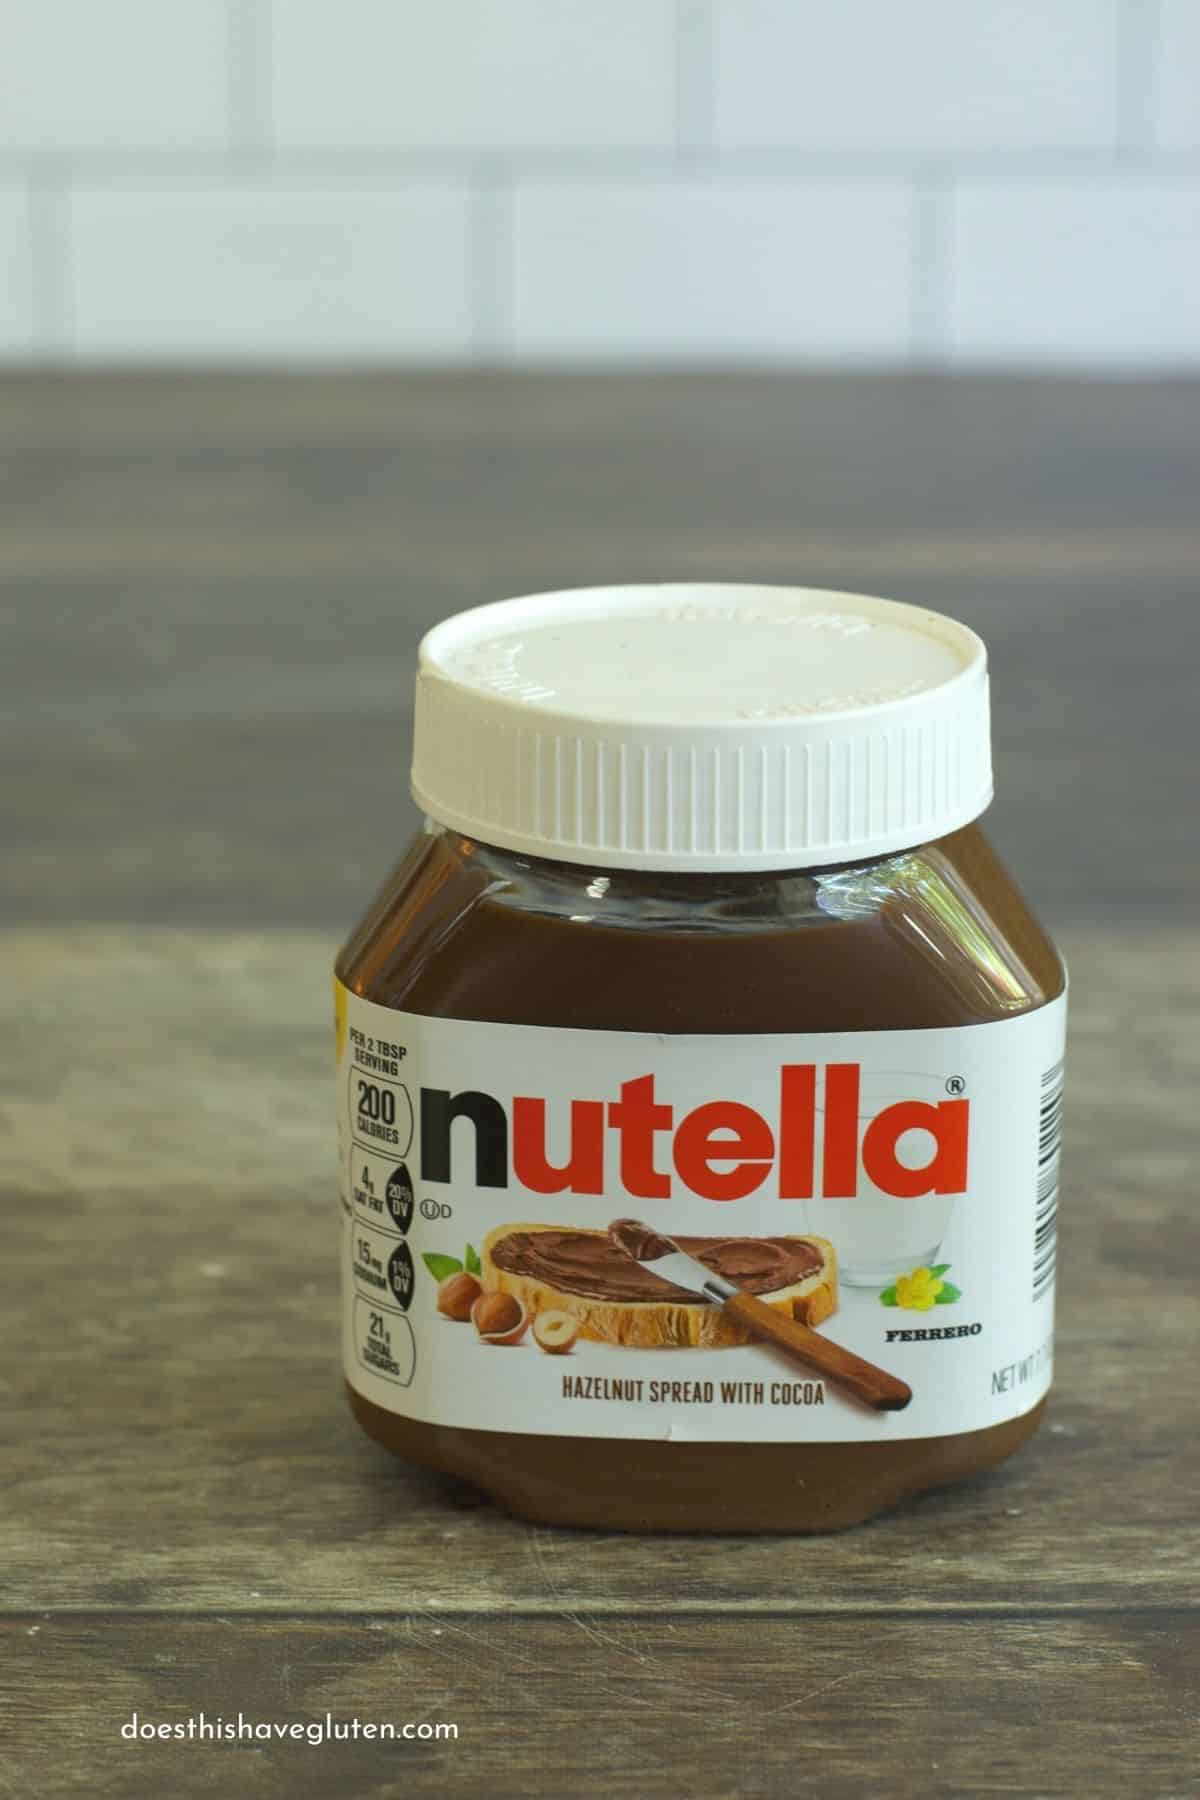 A small jar of nutella on the counter.